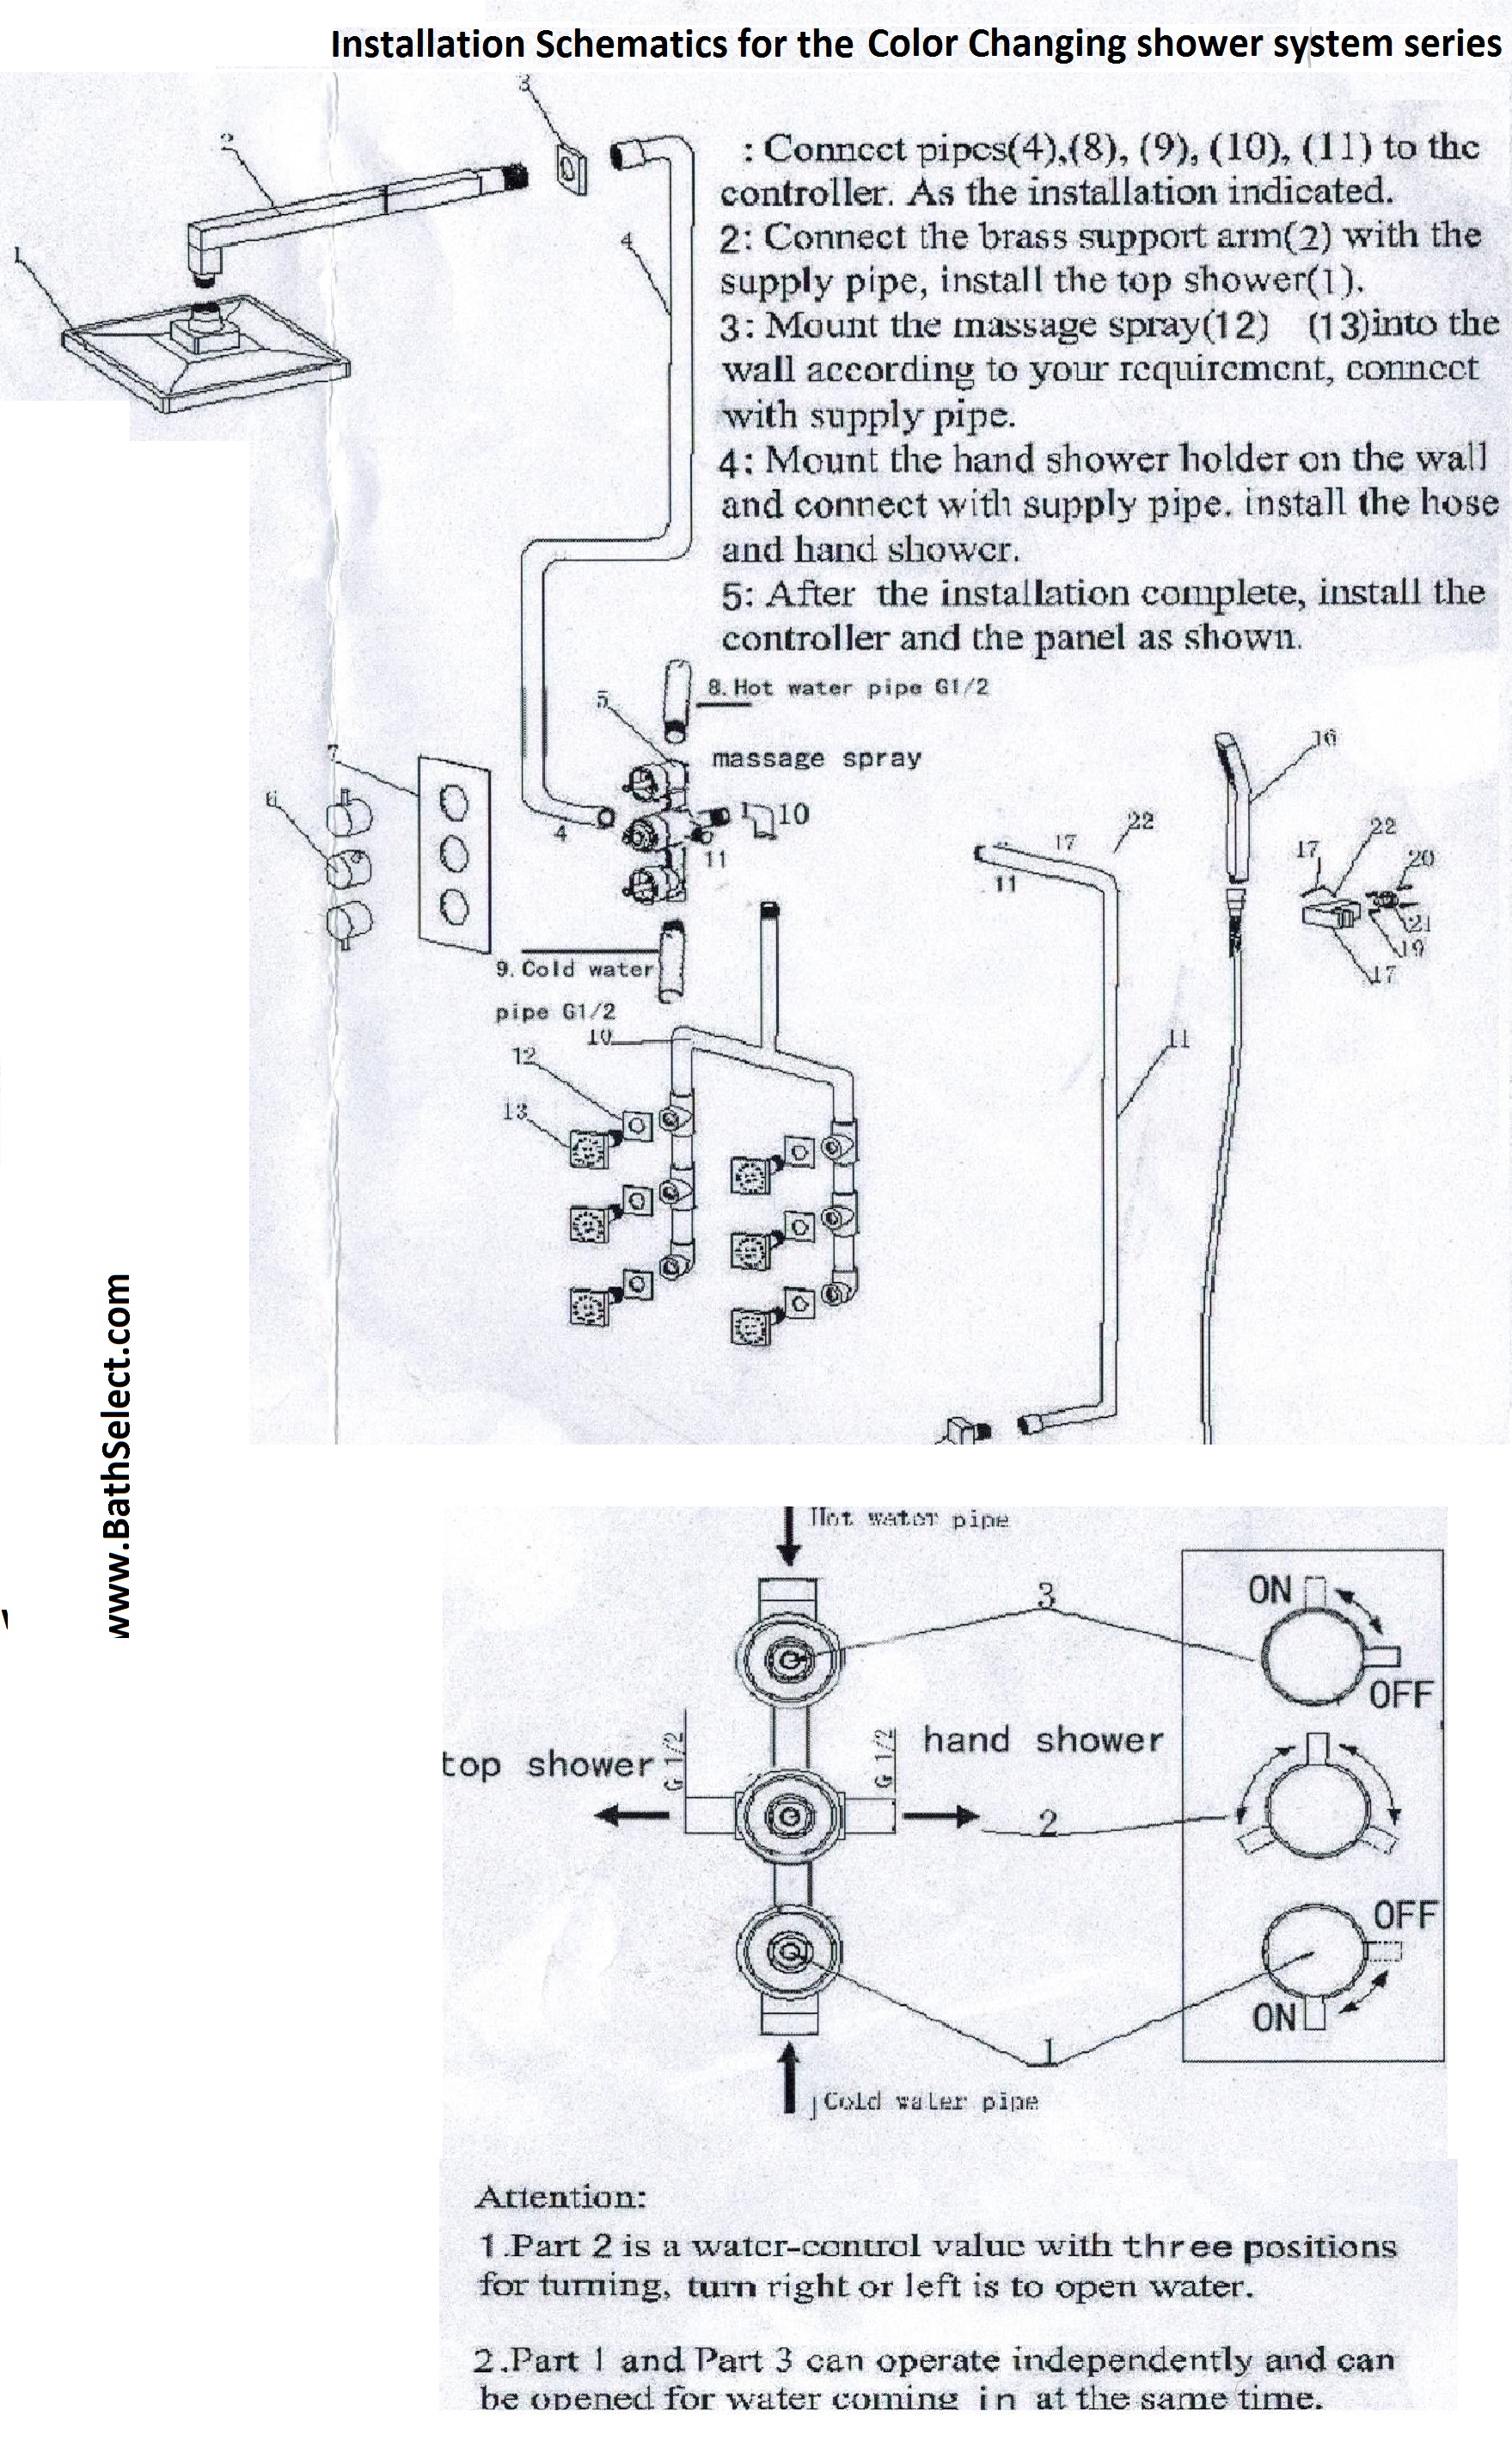 The Shower System Installation Schematics Diagram - color changing temperature sensing led shower head